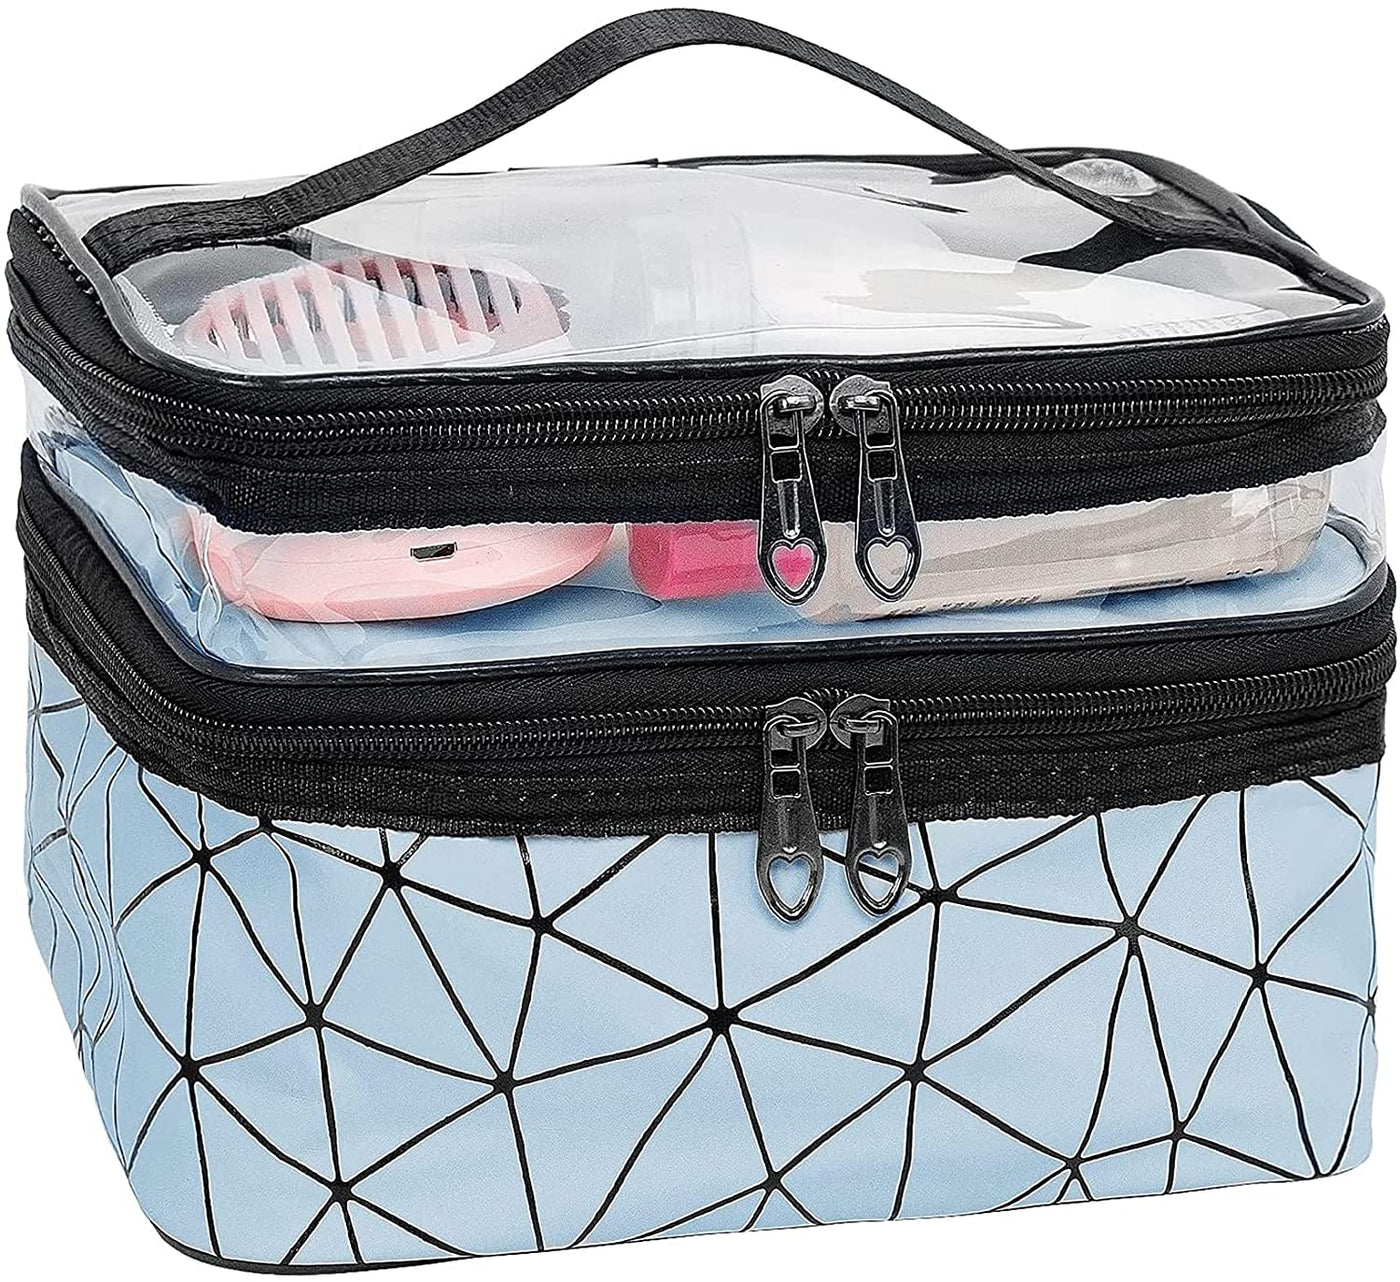 Makeup Bags Double Layer Travel Cosmetic Cases - Blue Diamond